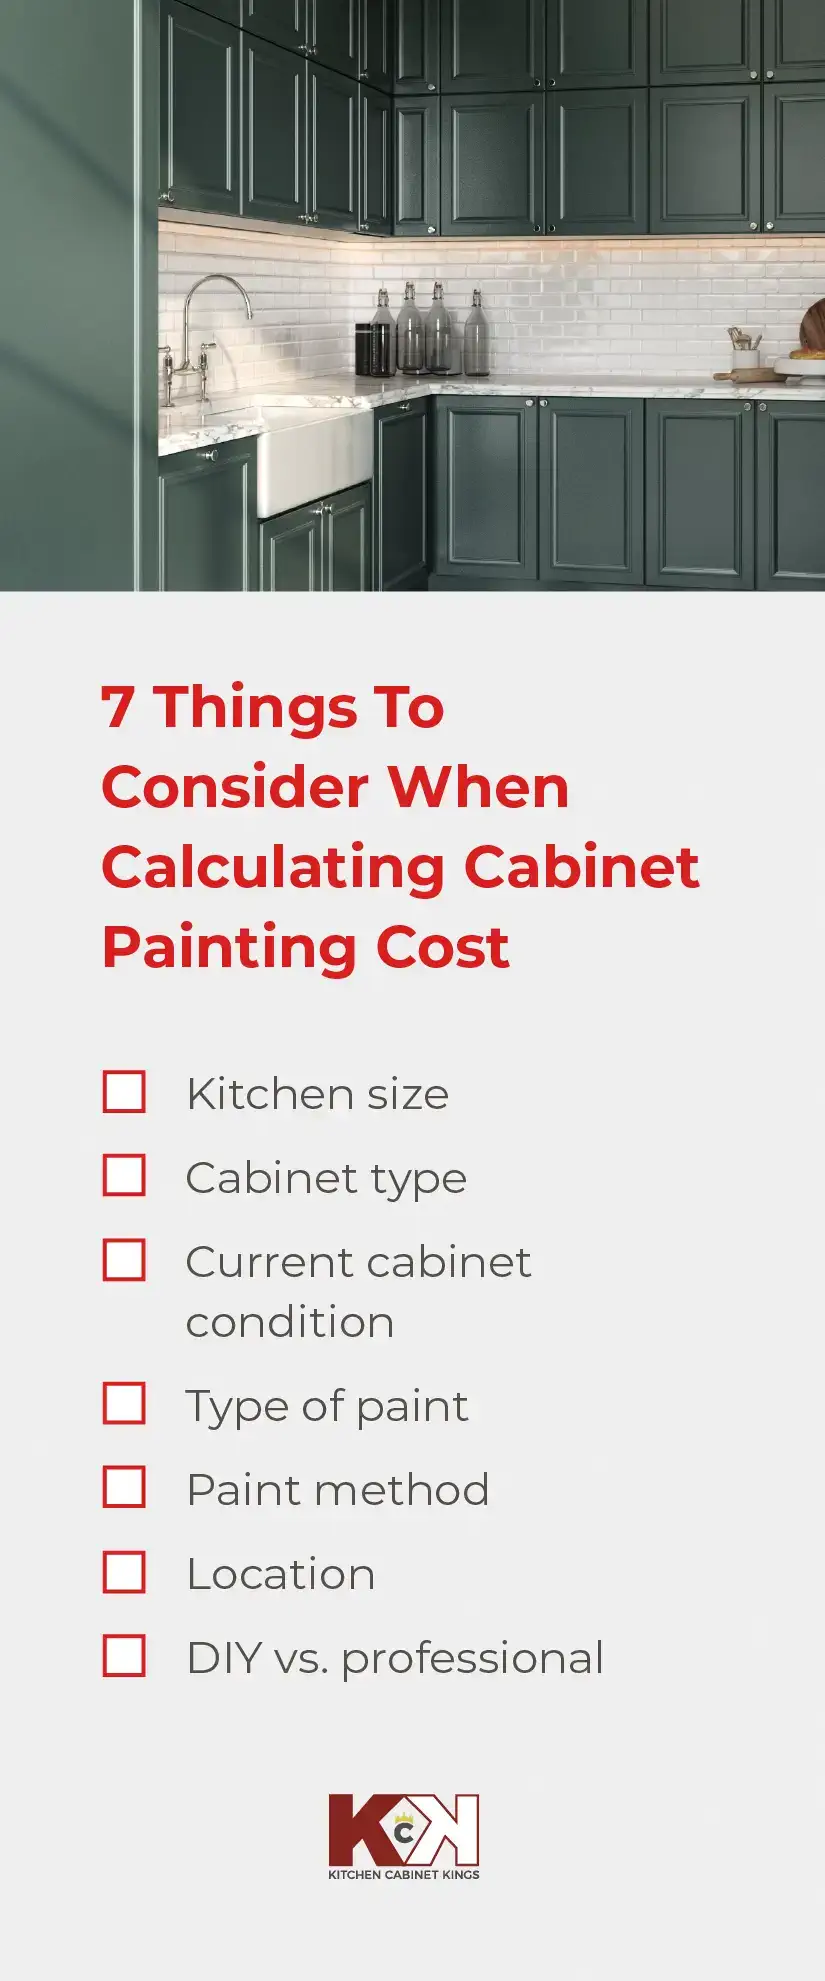 Thermofoil kitchen cabinet doors can bubble or fade. Here's what you can do